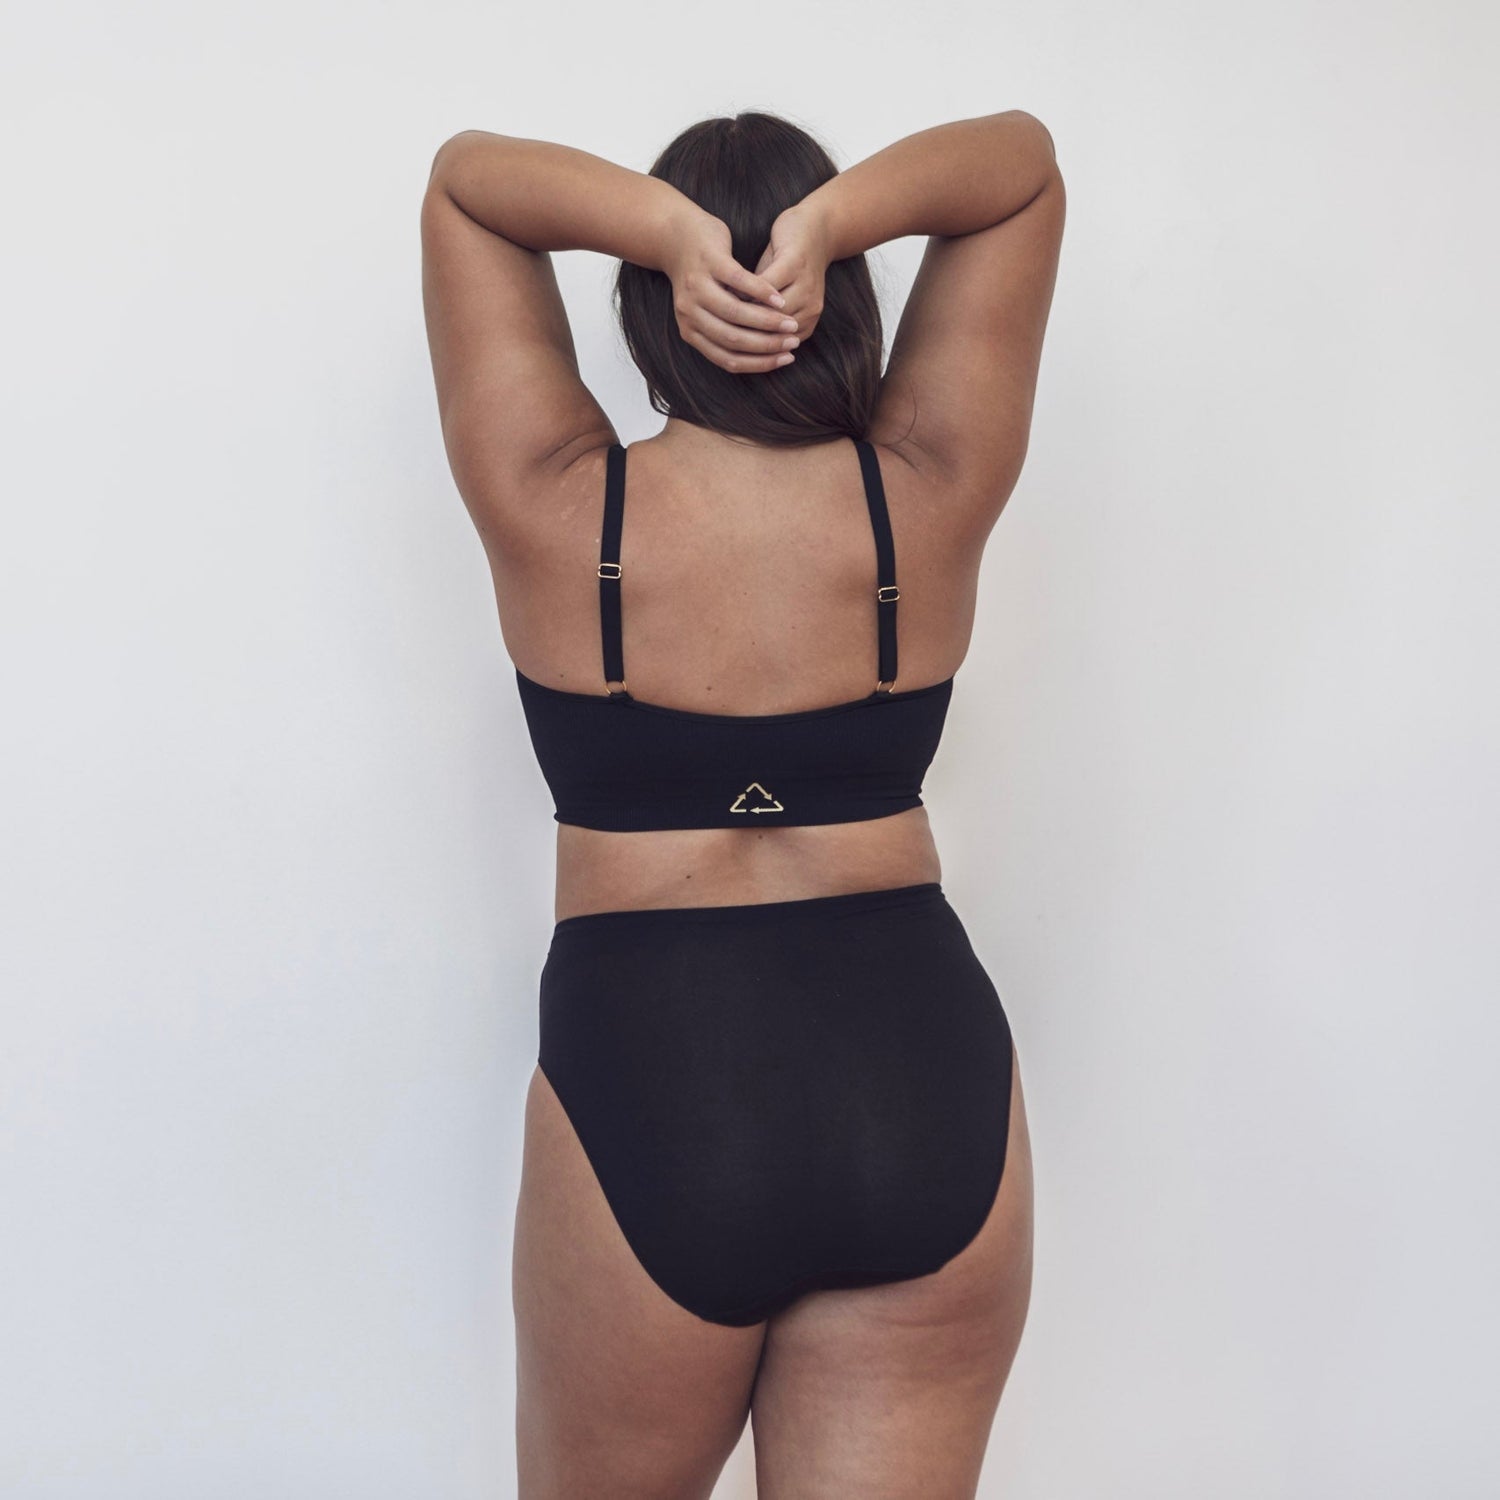 Sustainable black high waist brief by Underwear for Humanity: ethical, sustainable. sizes 6-26. light, breathable. Models wear high-waisted underwear. underwear sits high on the waist, full seat coverage. smooth under clothing. made from Tencel and recycled materials